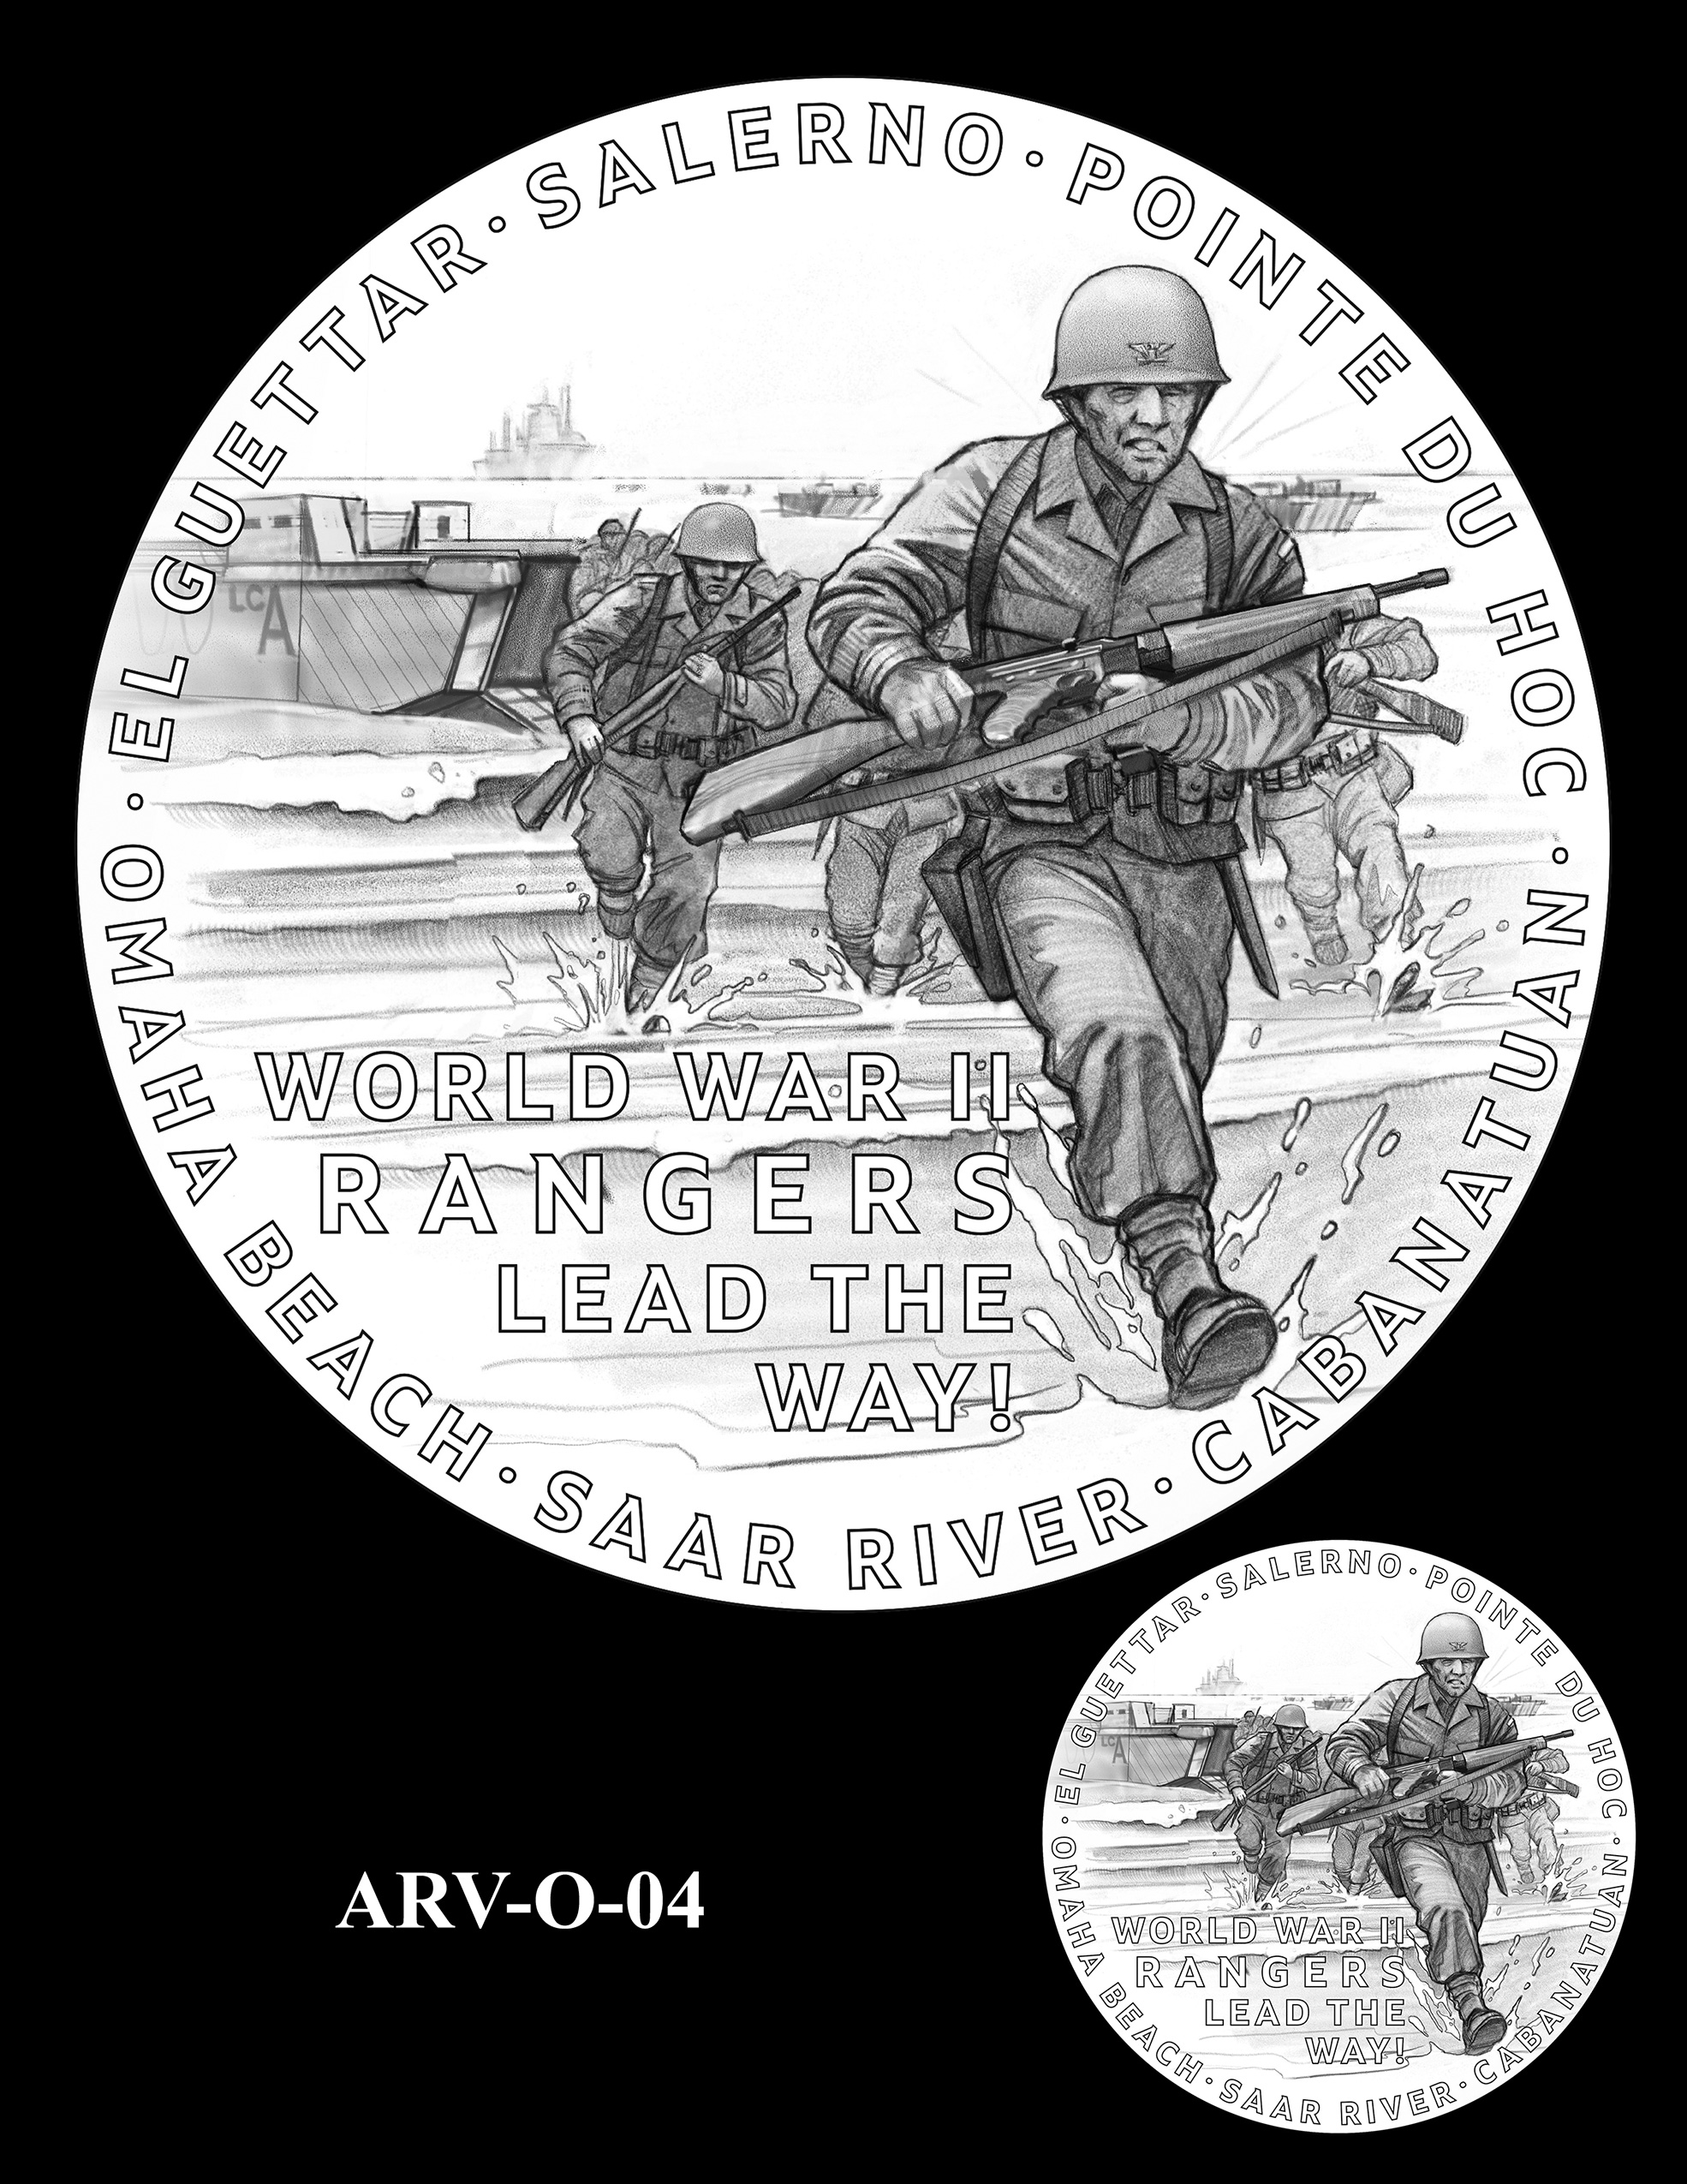 ARV-O-04 -- Army Ranger Veterans of WWII Congressional Gold Medal